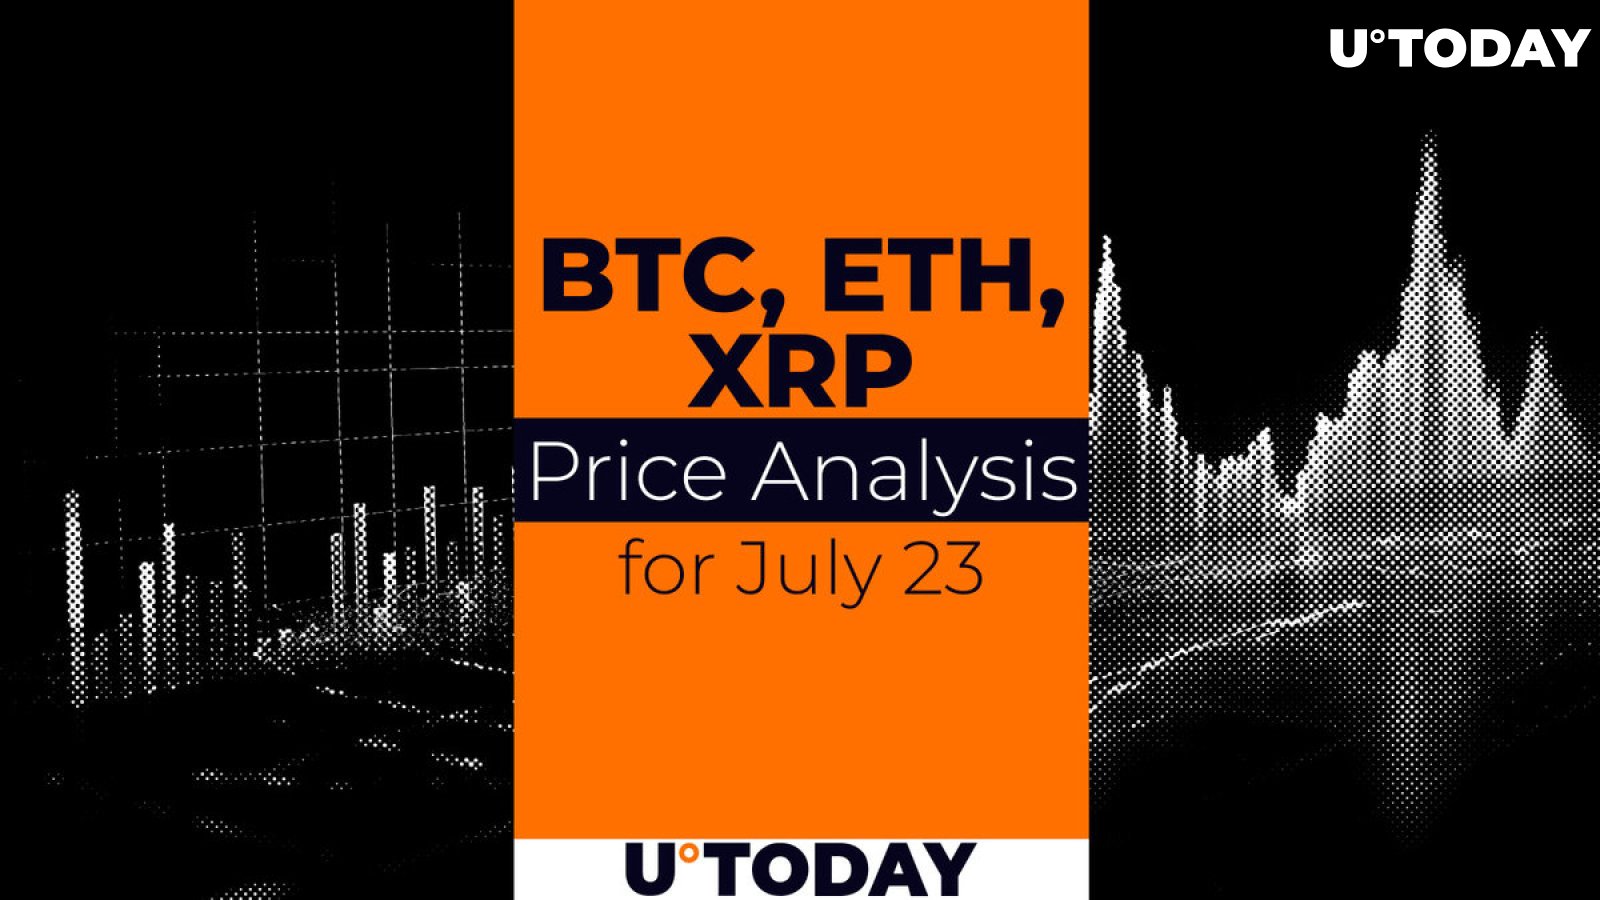 BTC, ETH and XRP Prediction for July 23